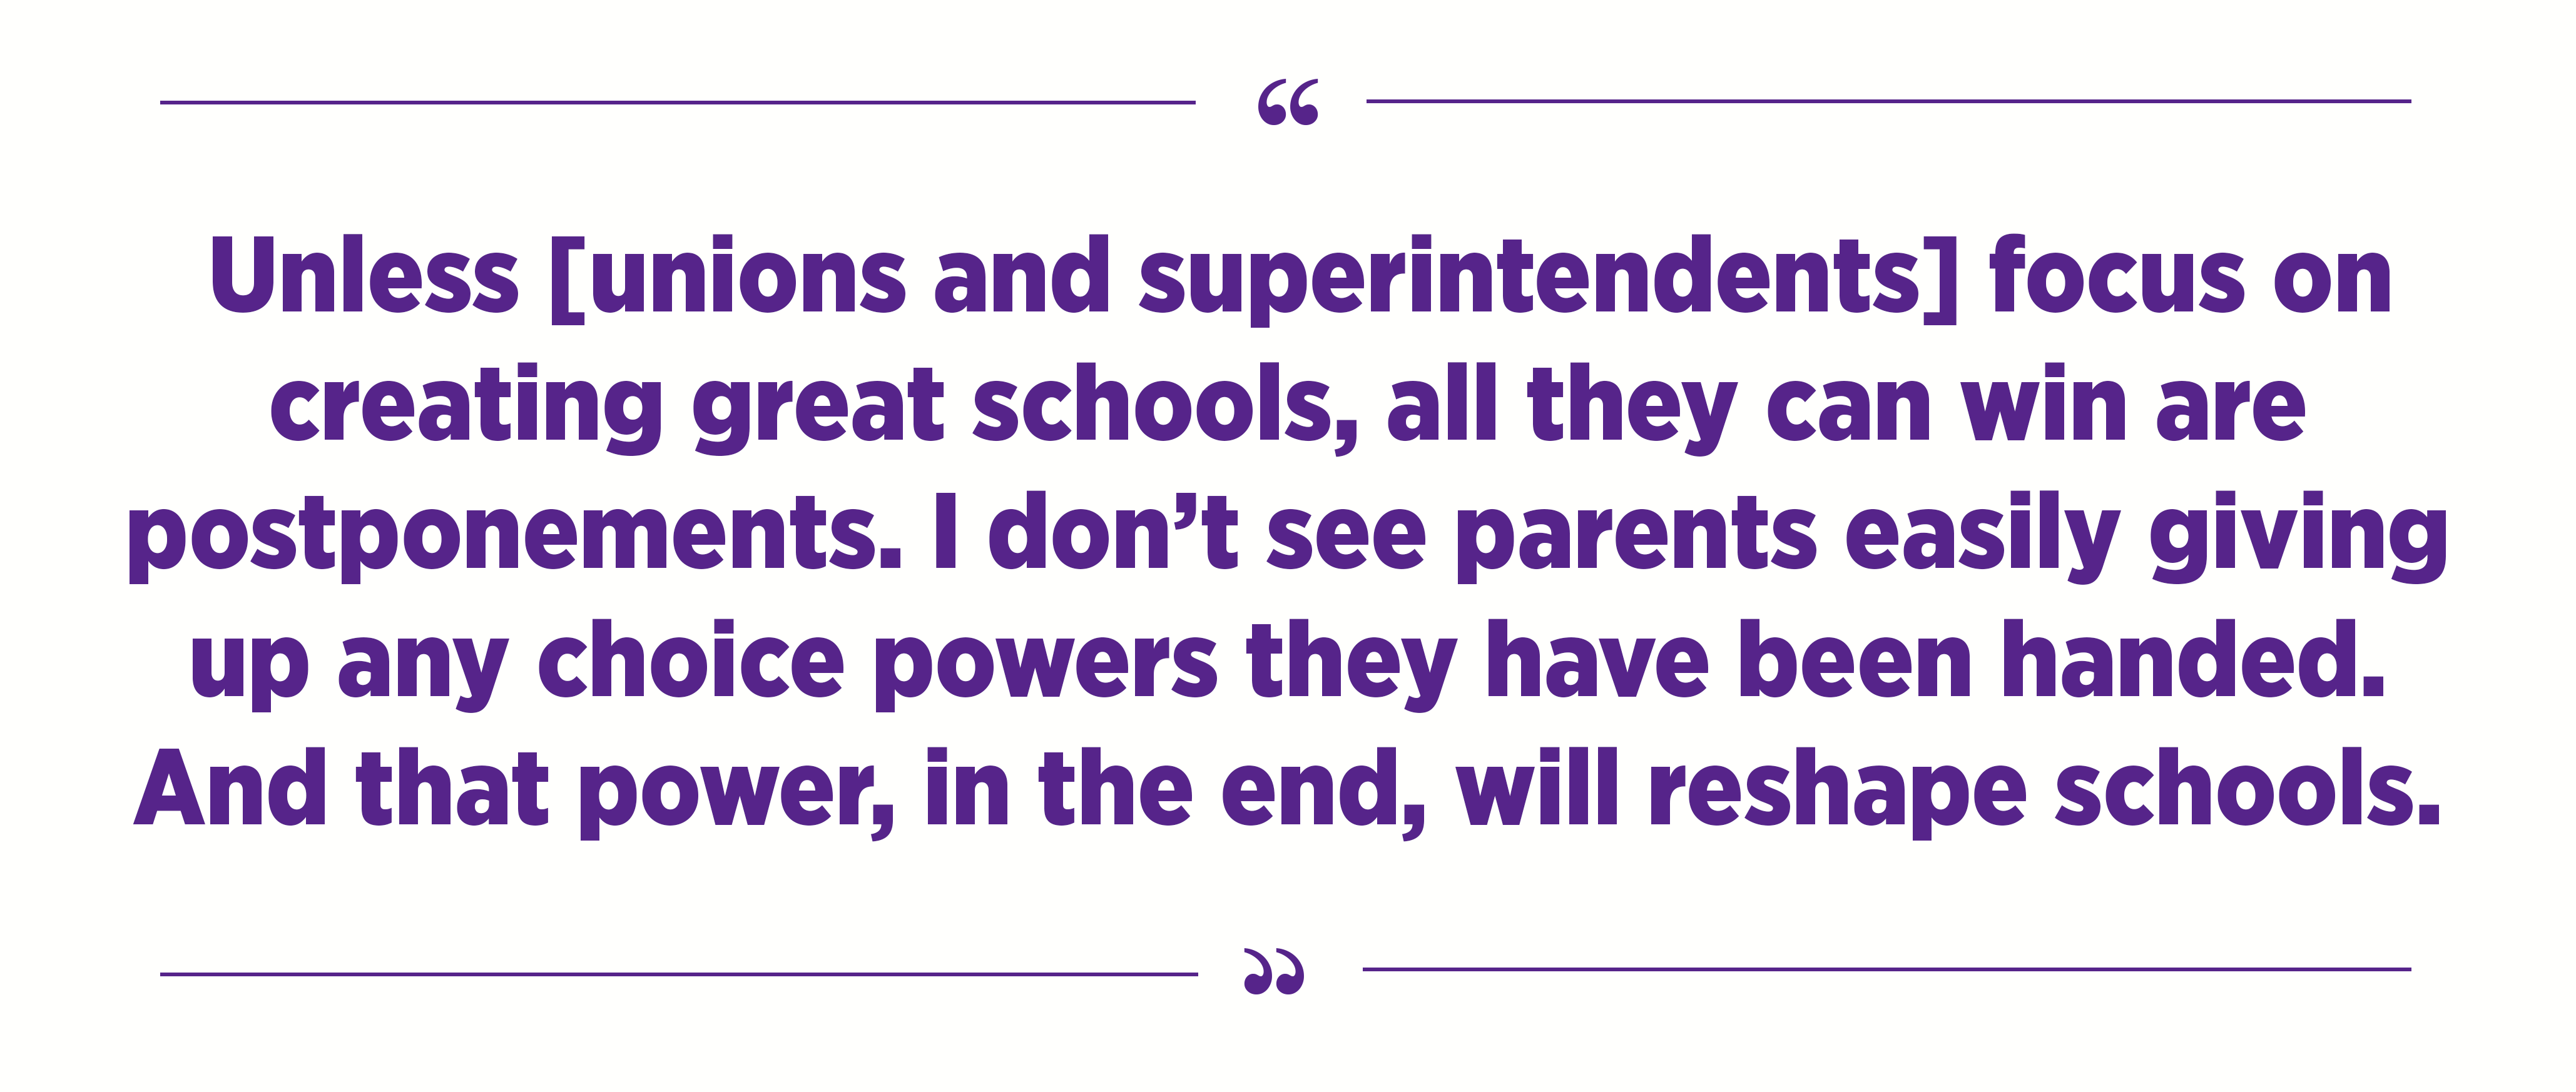 "I see unions and superintendents coming up with effective ways to postpone change, but in the end, unless they focus on creating great schools, all they can win are postponements. I don’t see parents easily giving up any choice powers they have been handed. And that power, in the end, will reshape schools."